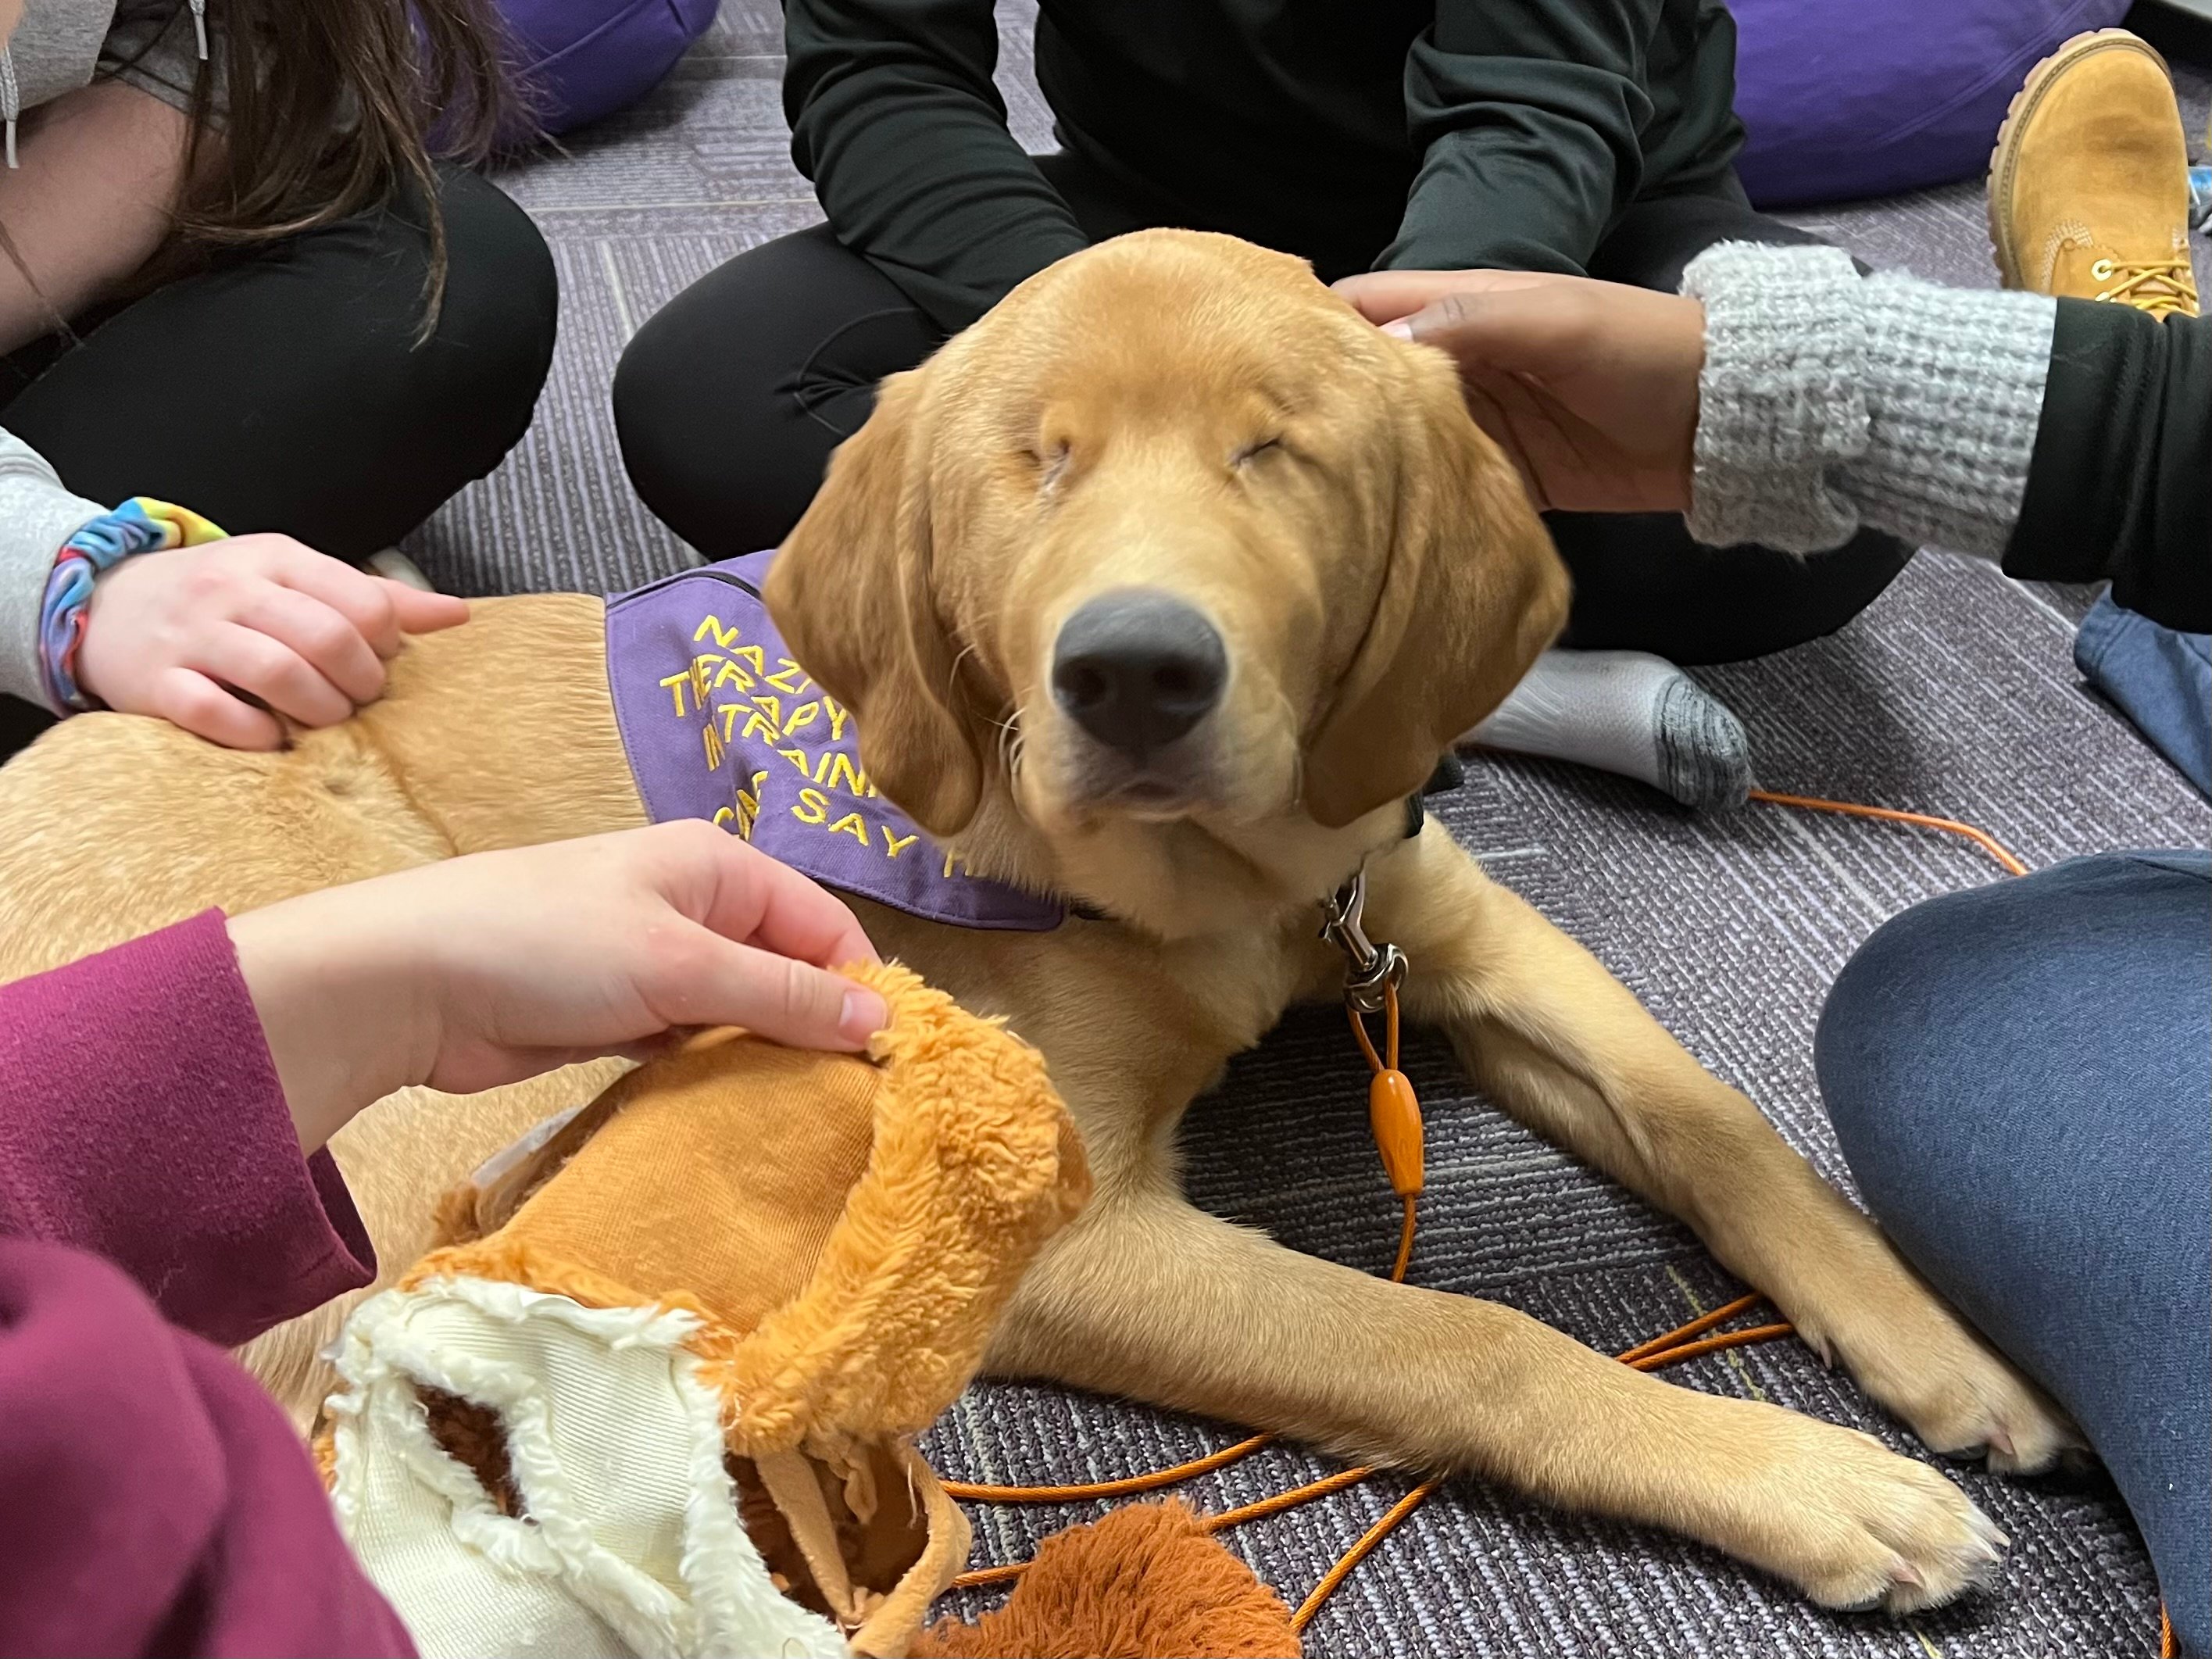 Tilly, a blind mixed-breed dog who looks like she's part golden retriever, wears a purple vest and is being petted by a number of students.